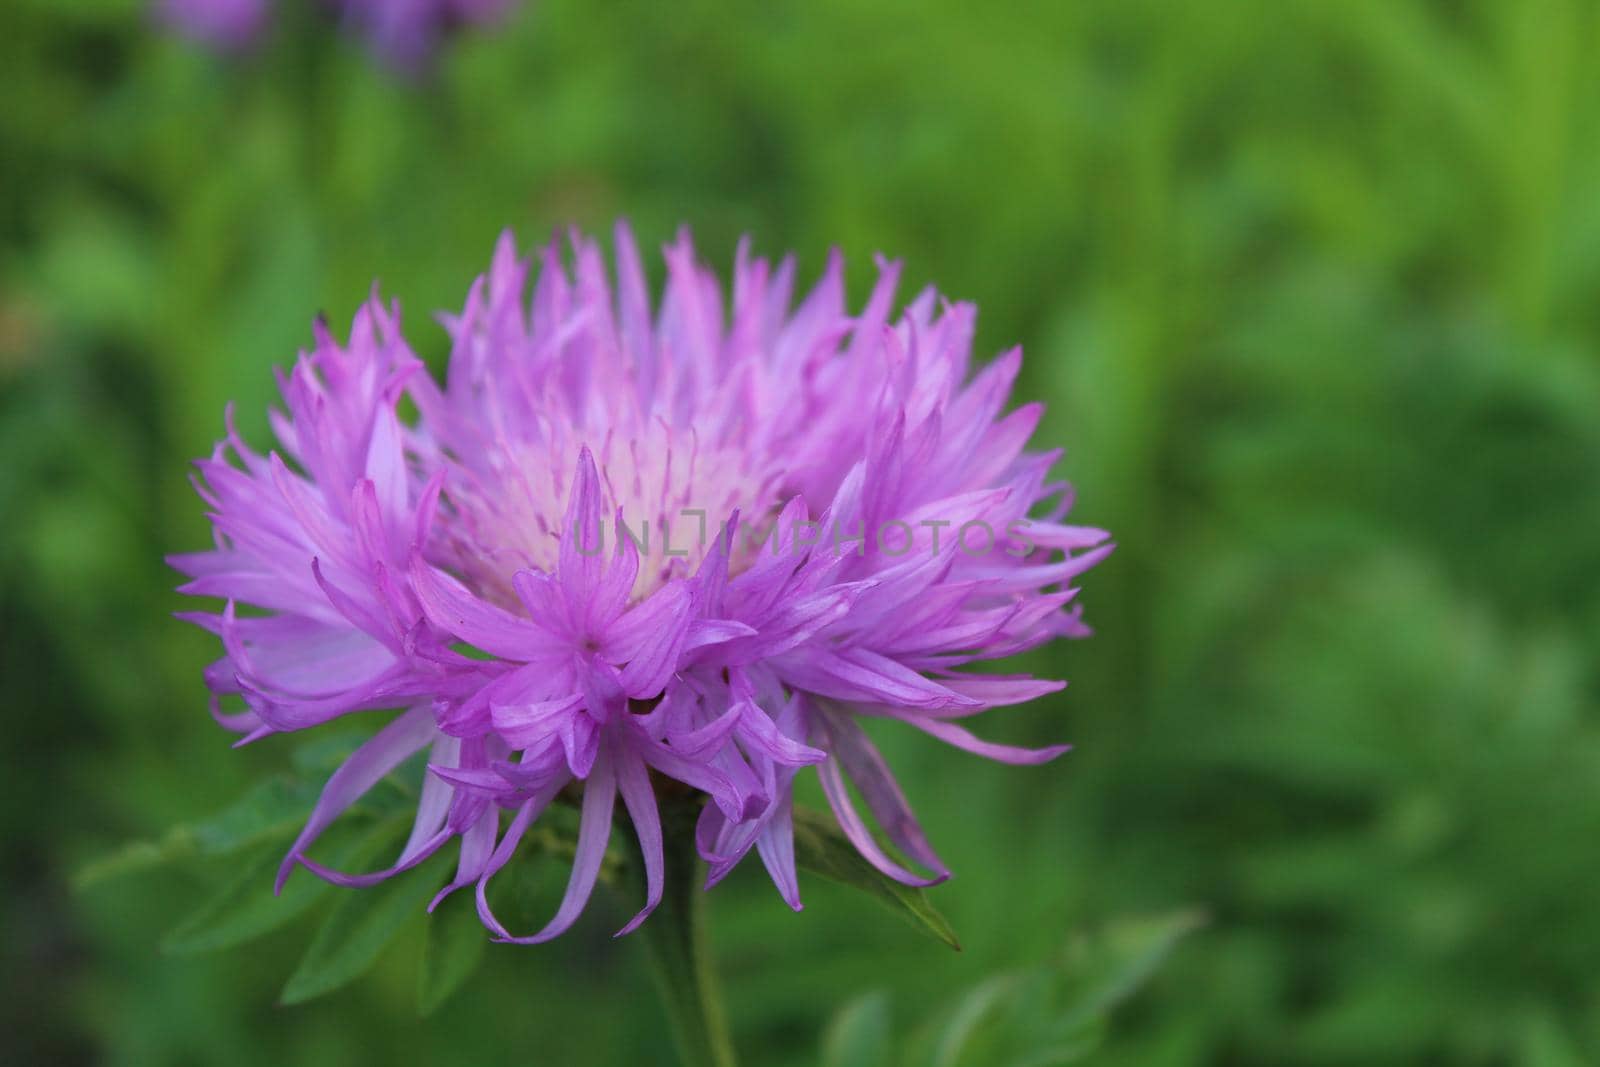 The flower of the asters is lilac-colored against the green grass close-up. View from above Aster bush. Centaurea Dealbata.